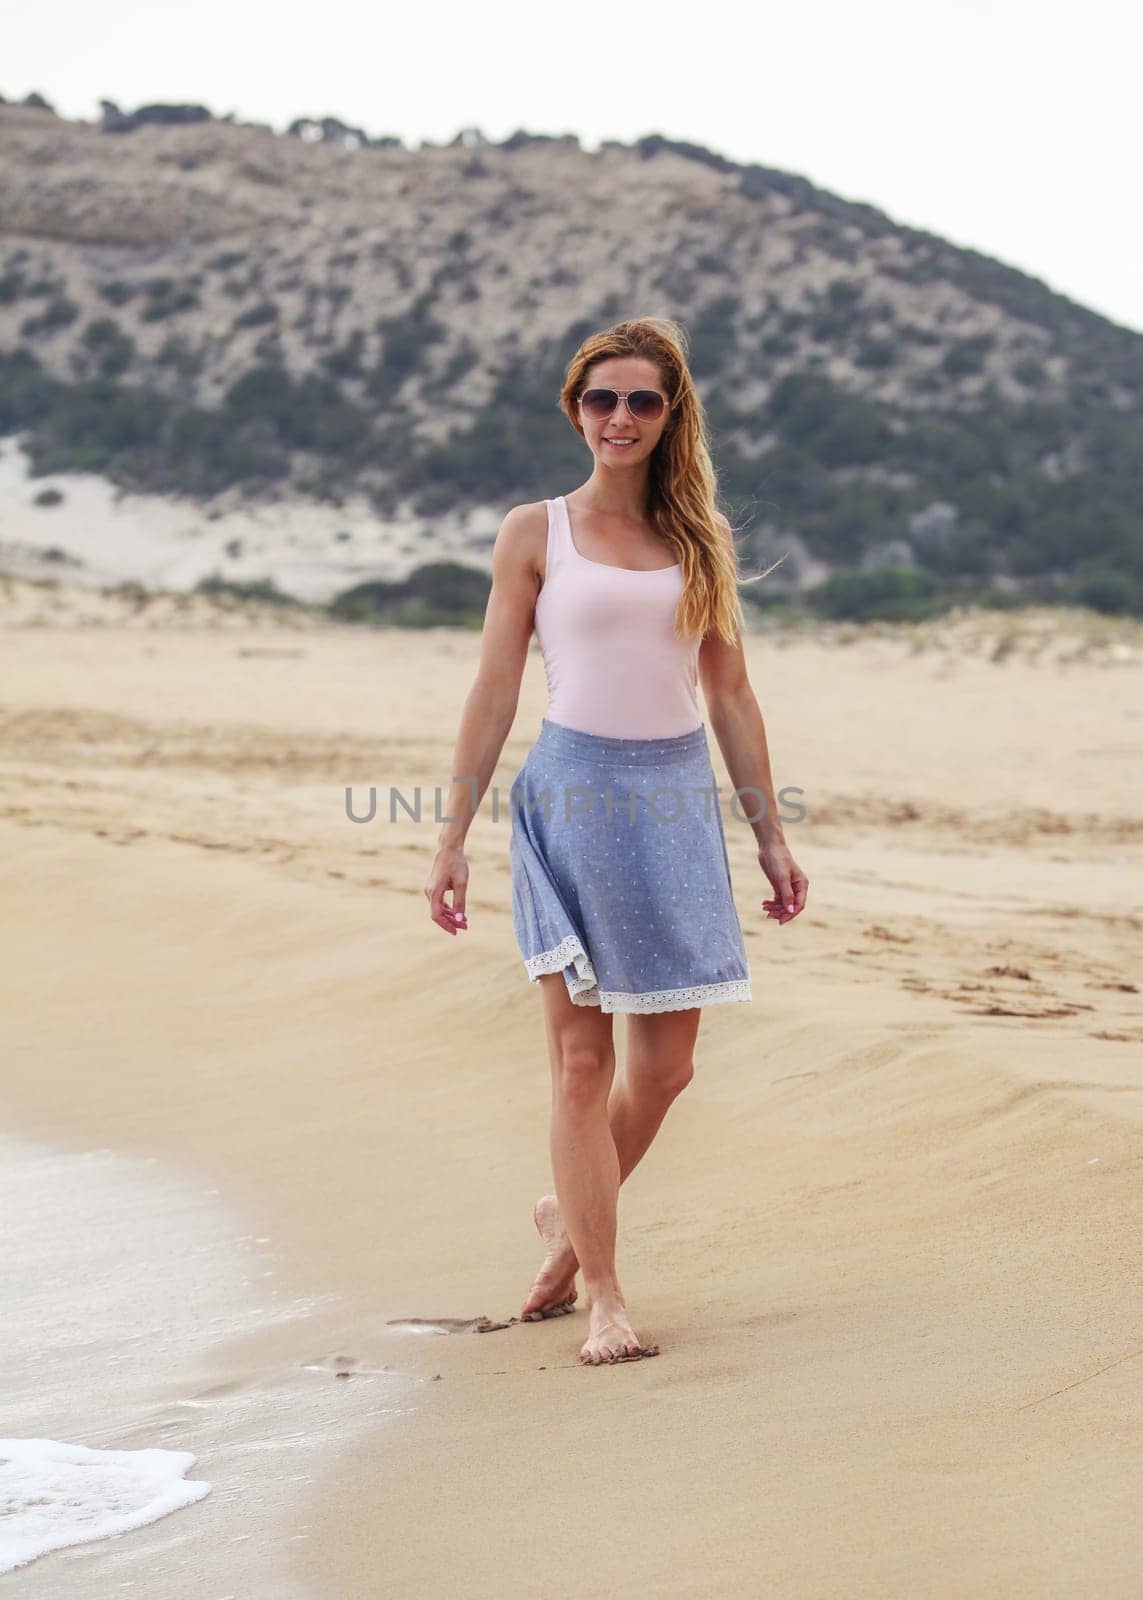 Young woman in blue skirt, t shirt and sunglasses walking on beach, smiling, overcast weather, hill behind her. by Ivanko